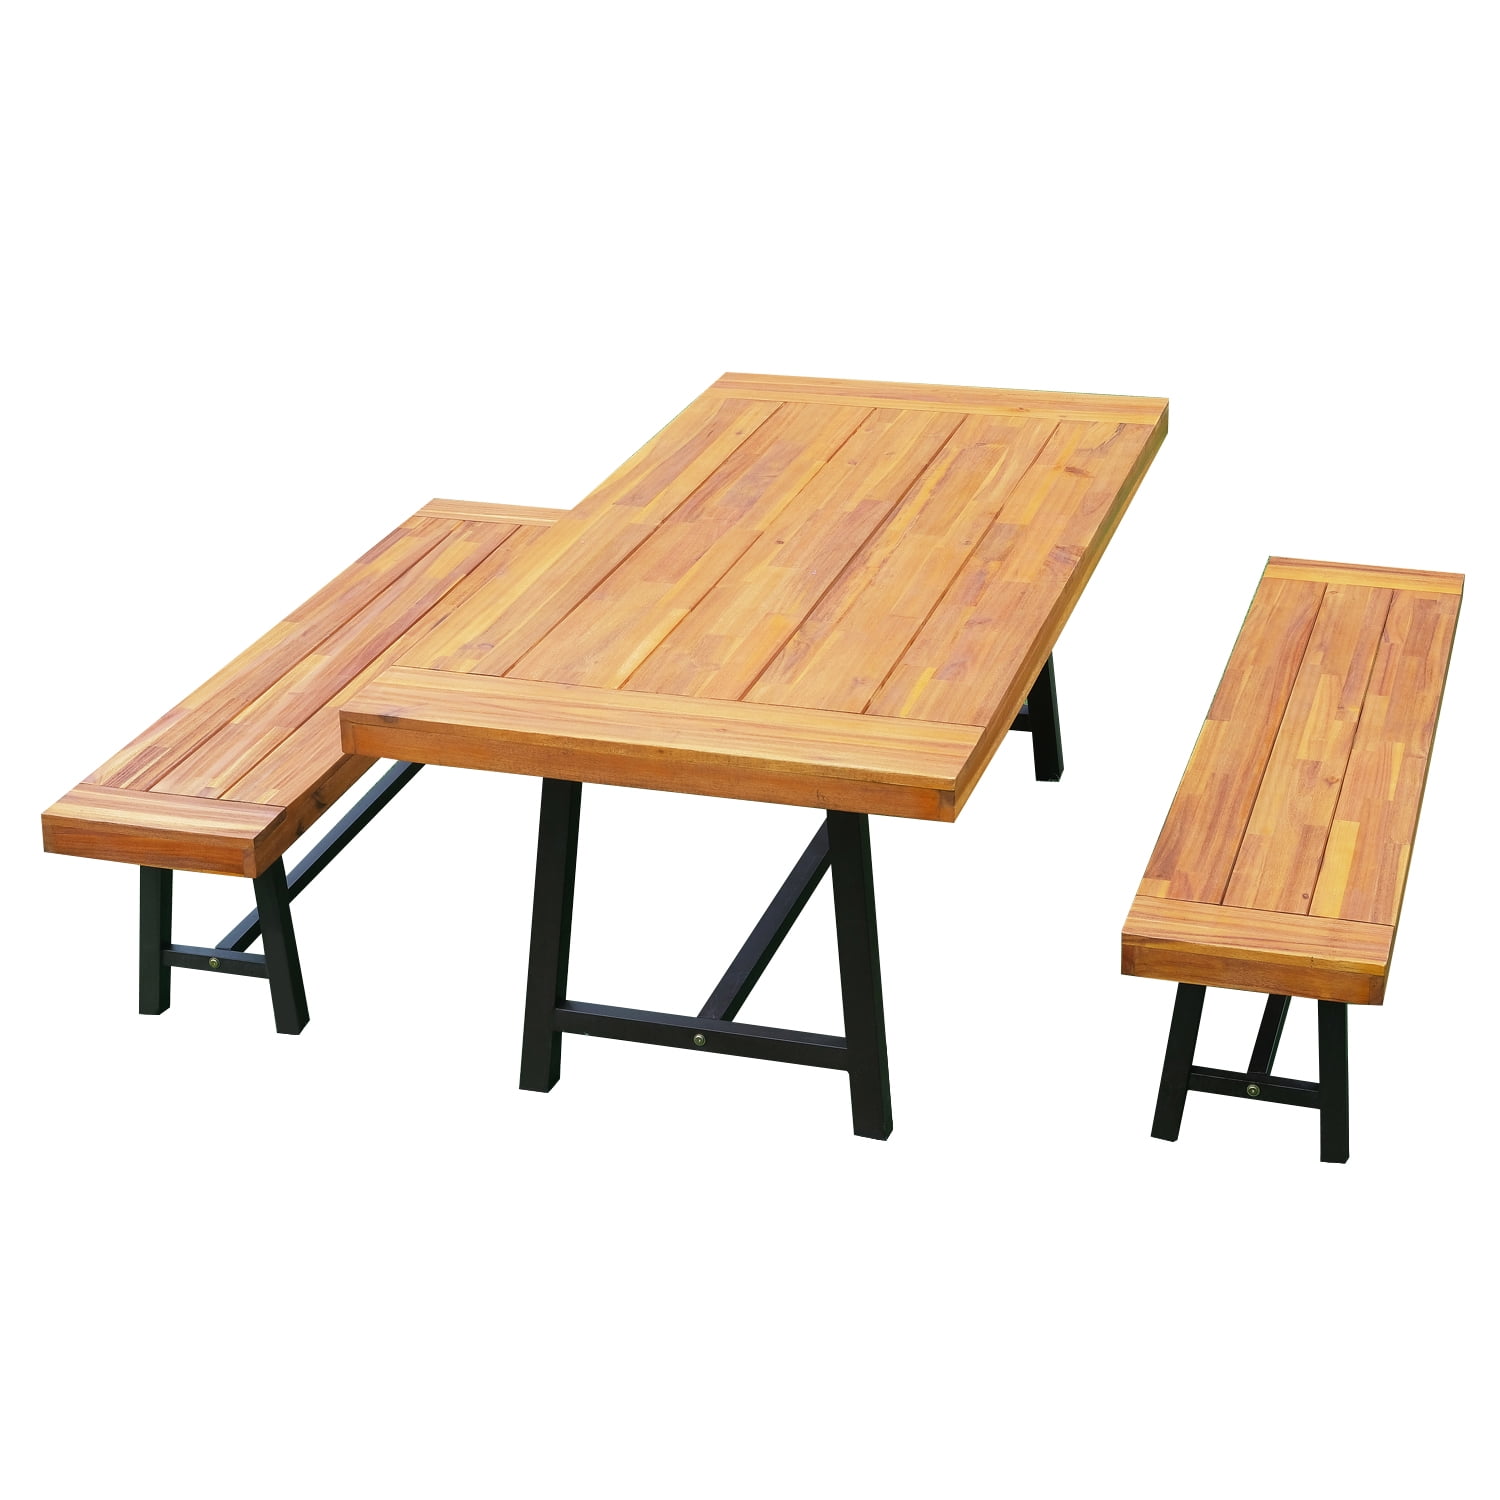 Picnic Perfect: The Best Picnic Tables for Casual Outdoor Seating